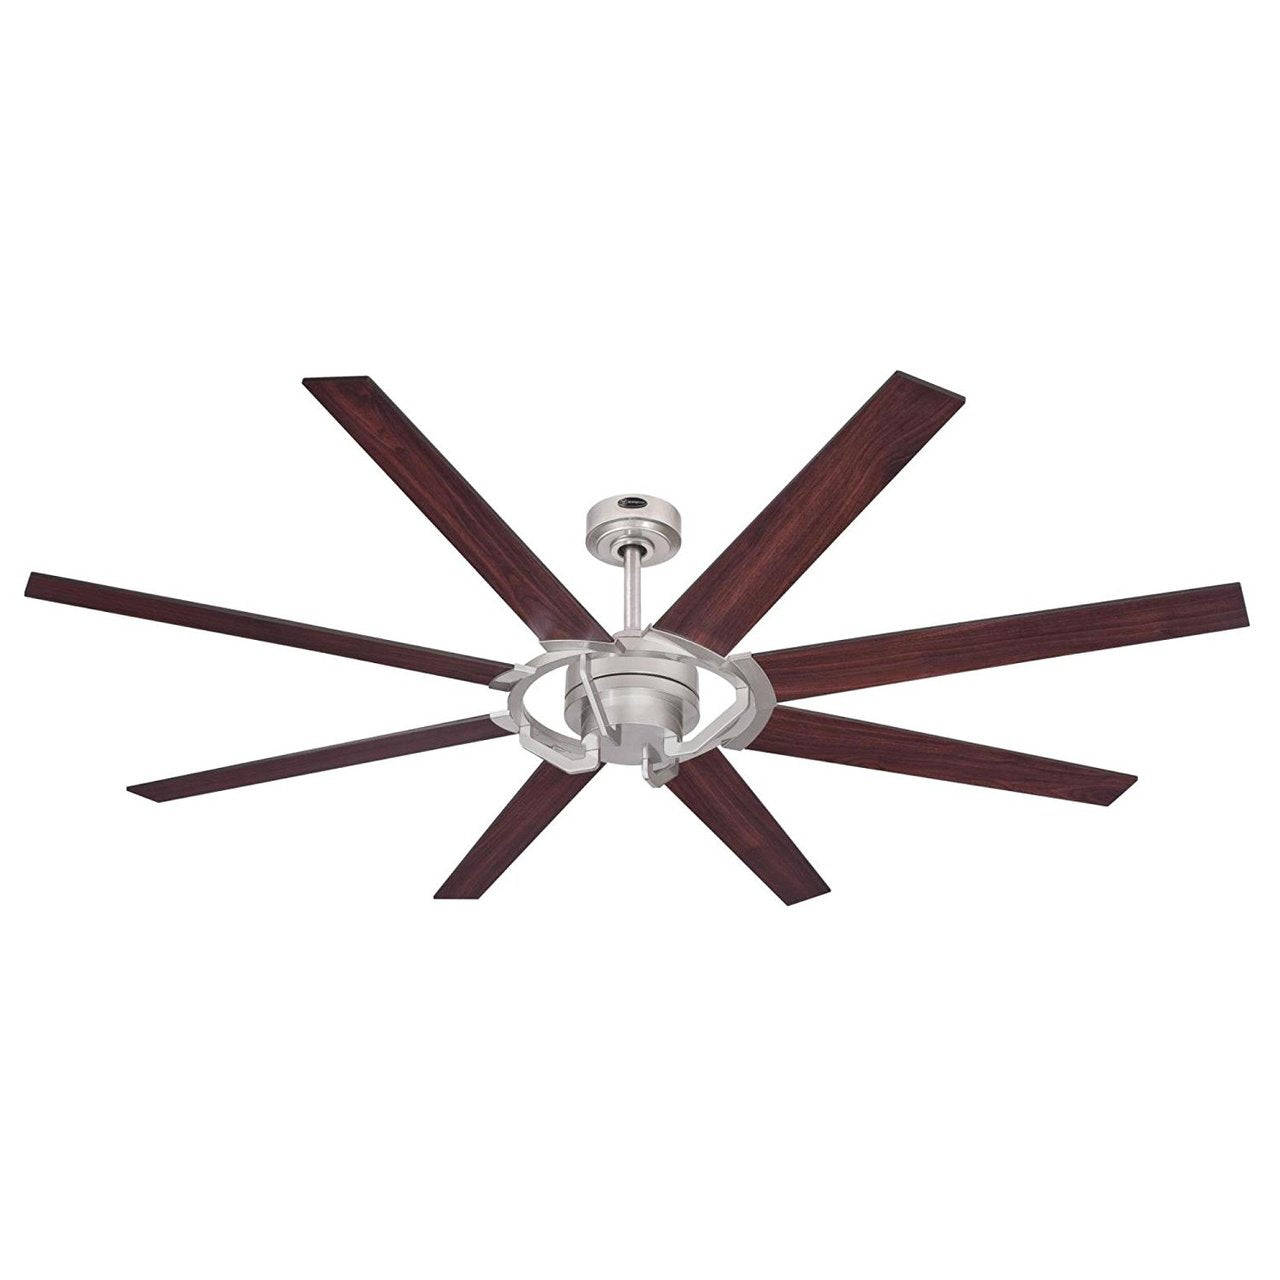 Westinghouse 7217300 Damen 68-Inch Nickel Luster Indoor DC Motor Ceiling Fan, Remote Control Included